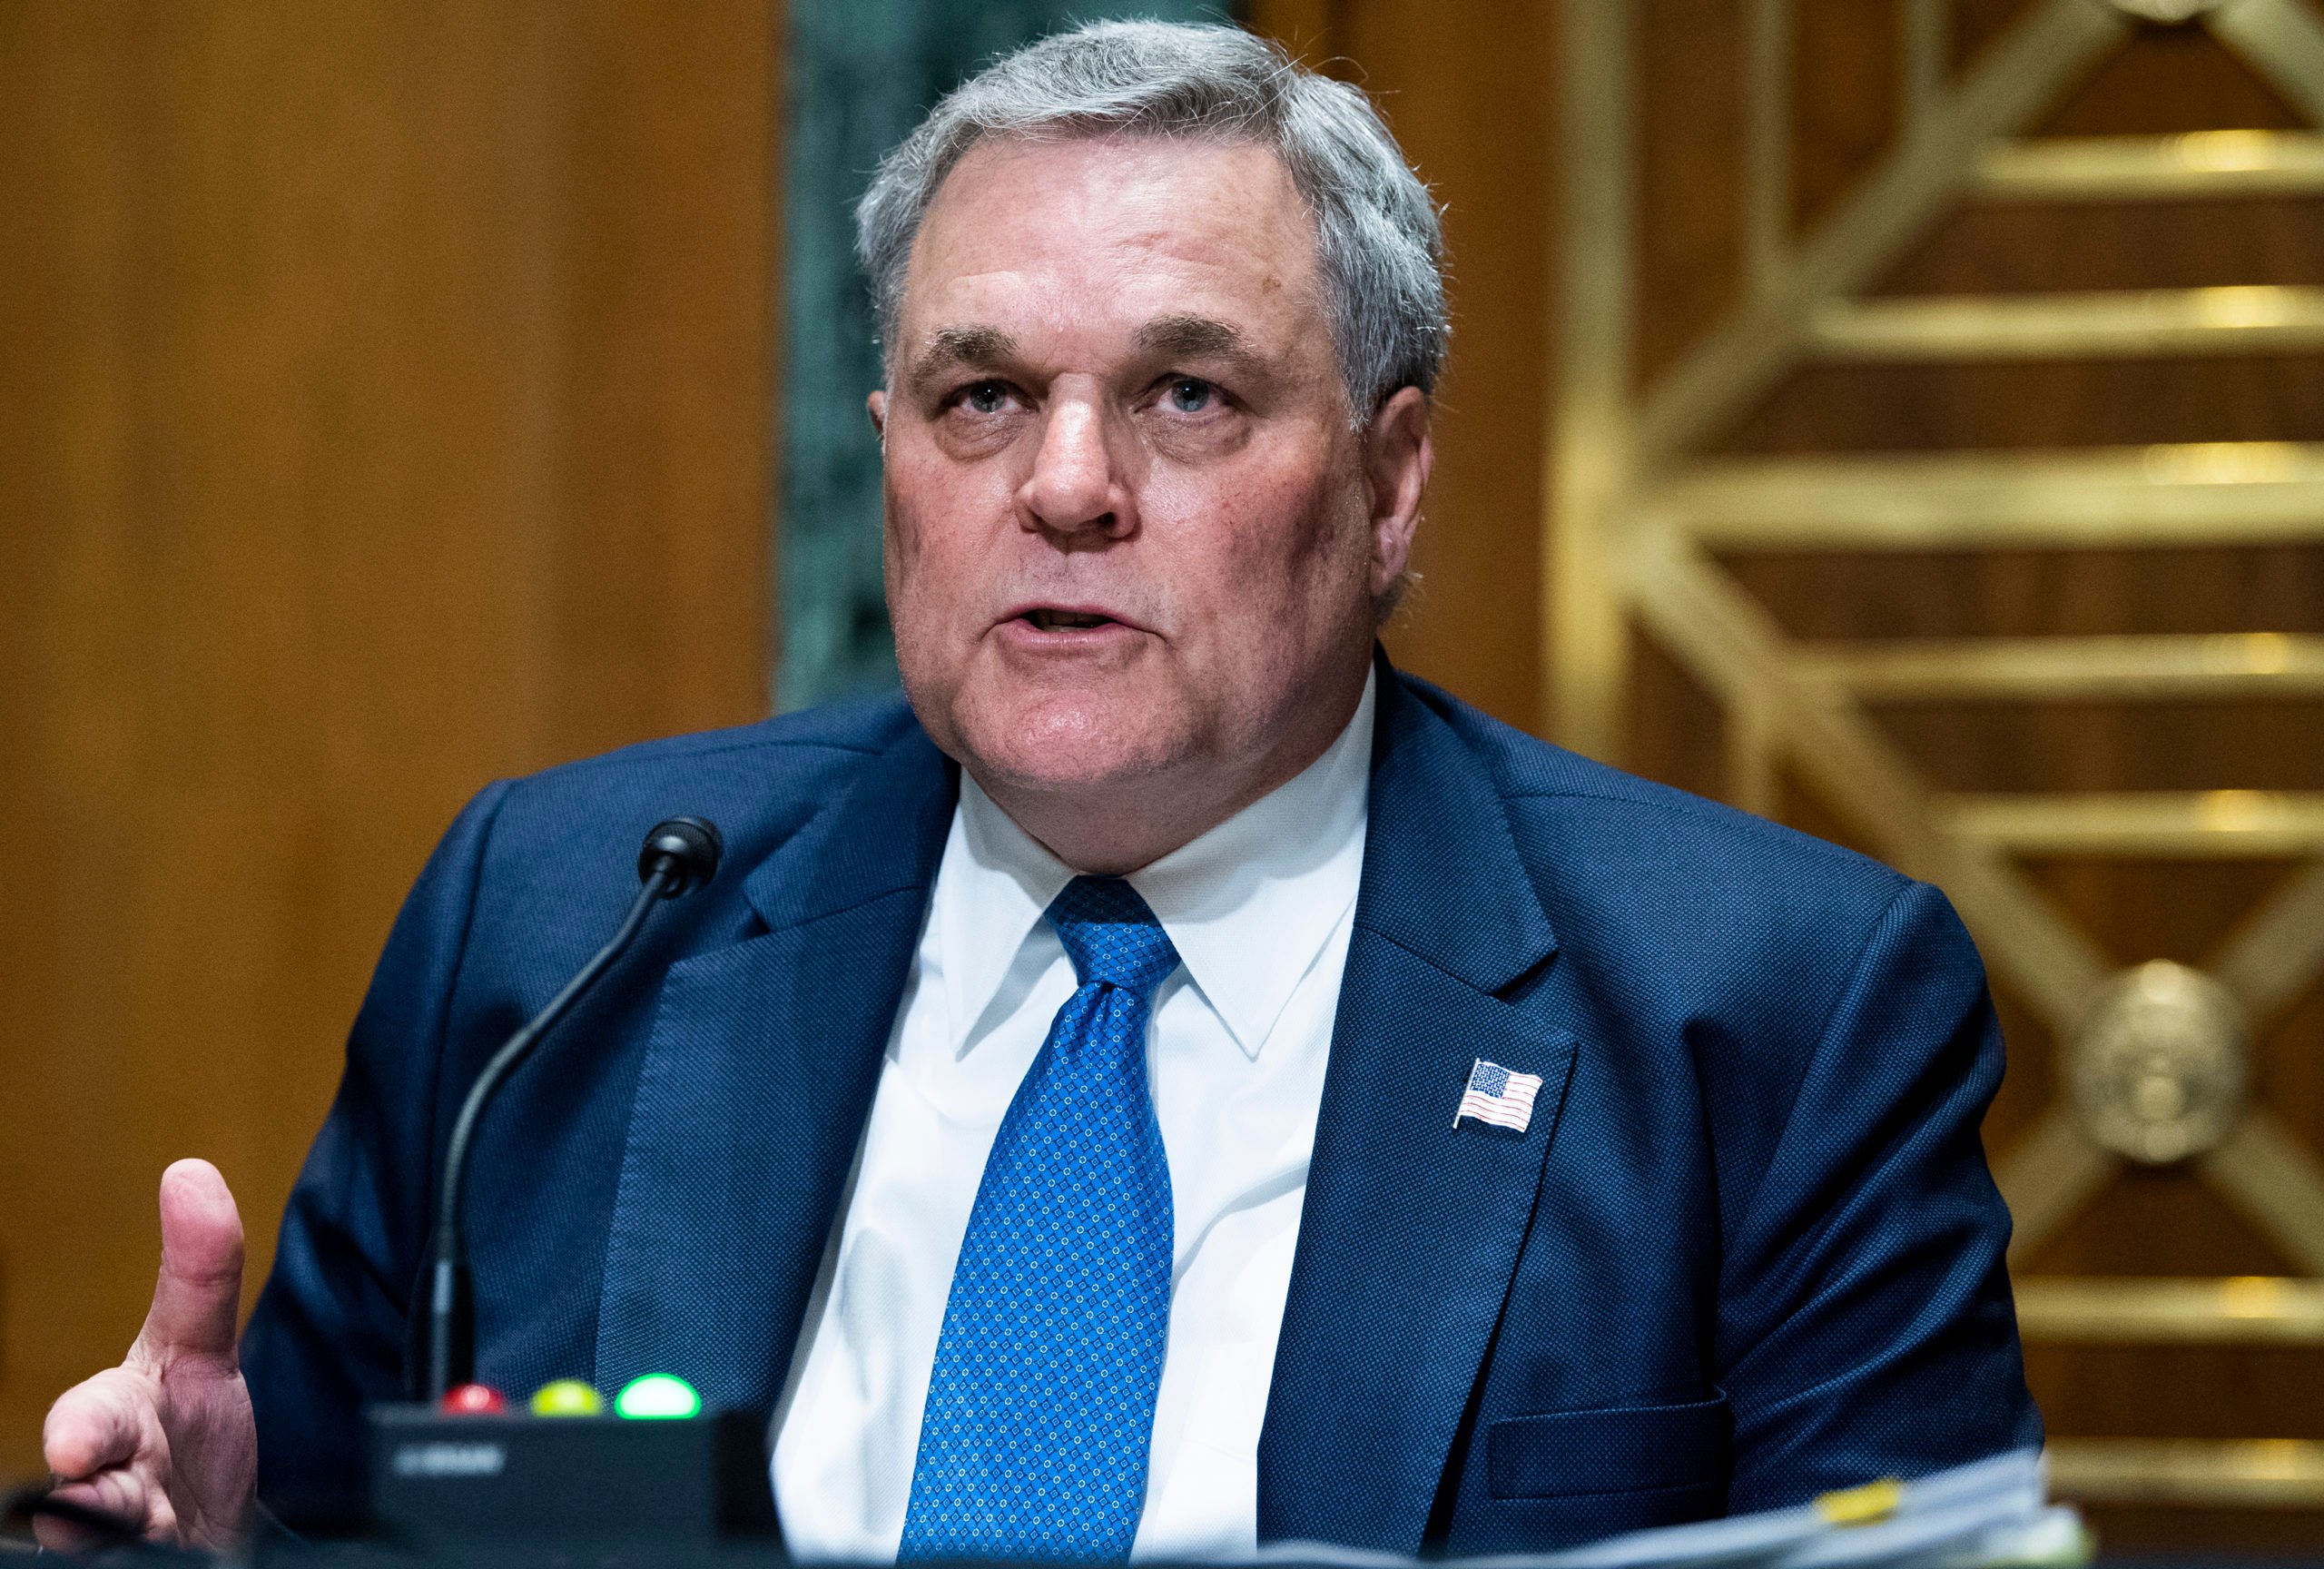 WASHINGTON, DC - JUNE 08: Internal Revenue Service (IRS) Commissioner Charles Rettig testifies during a Senate Finance Committee hearing June 8, 2021 on Capitol Hill in Washington, D.C. The committee is hearing testimony on the IRS budget request for 2022. (Photo by Tom Williams-Pool/Getty Images)